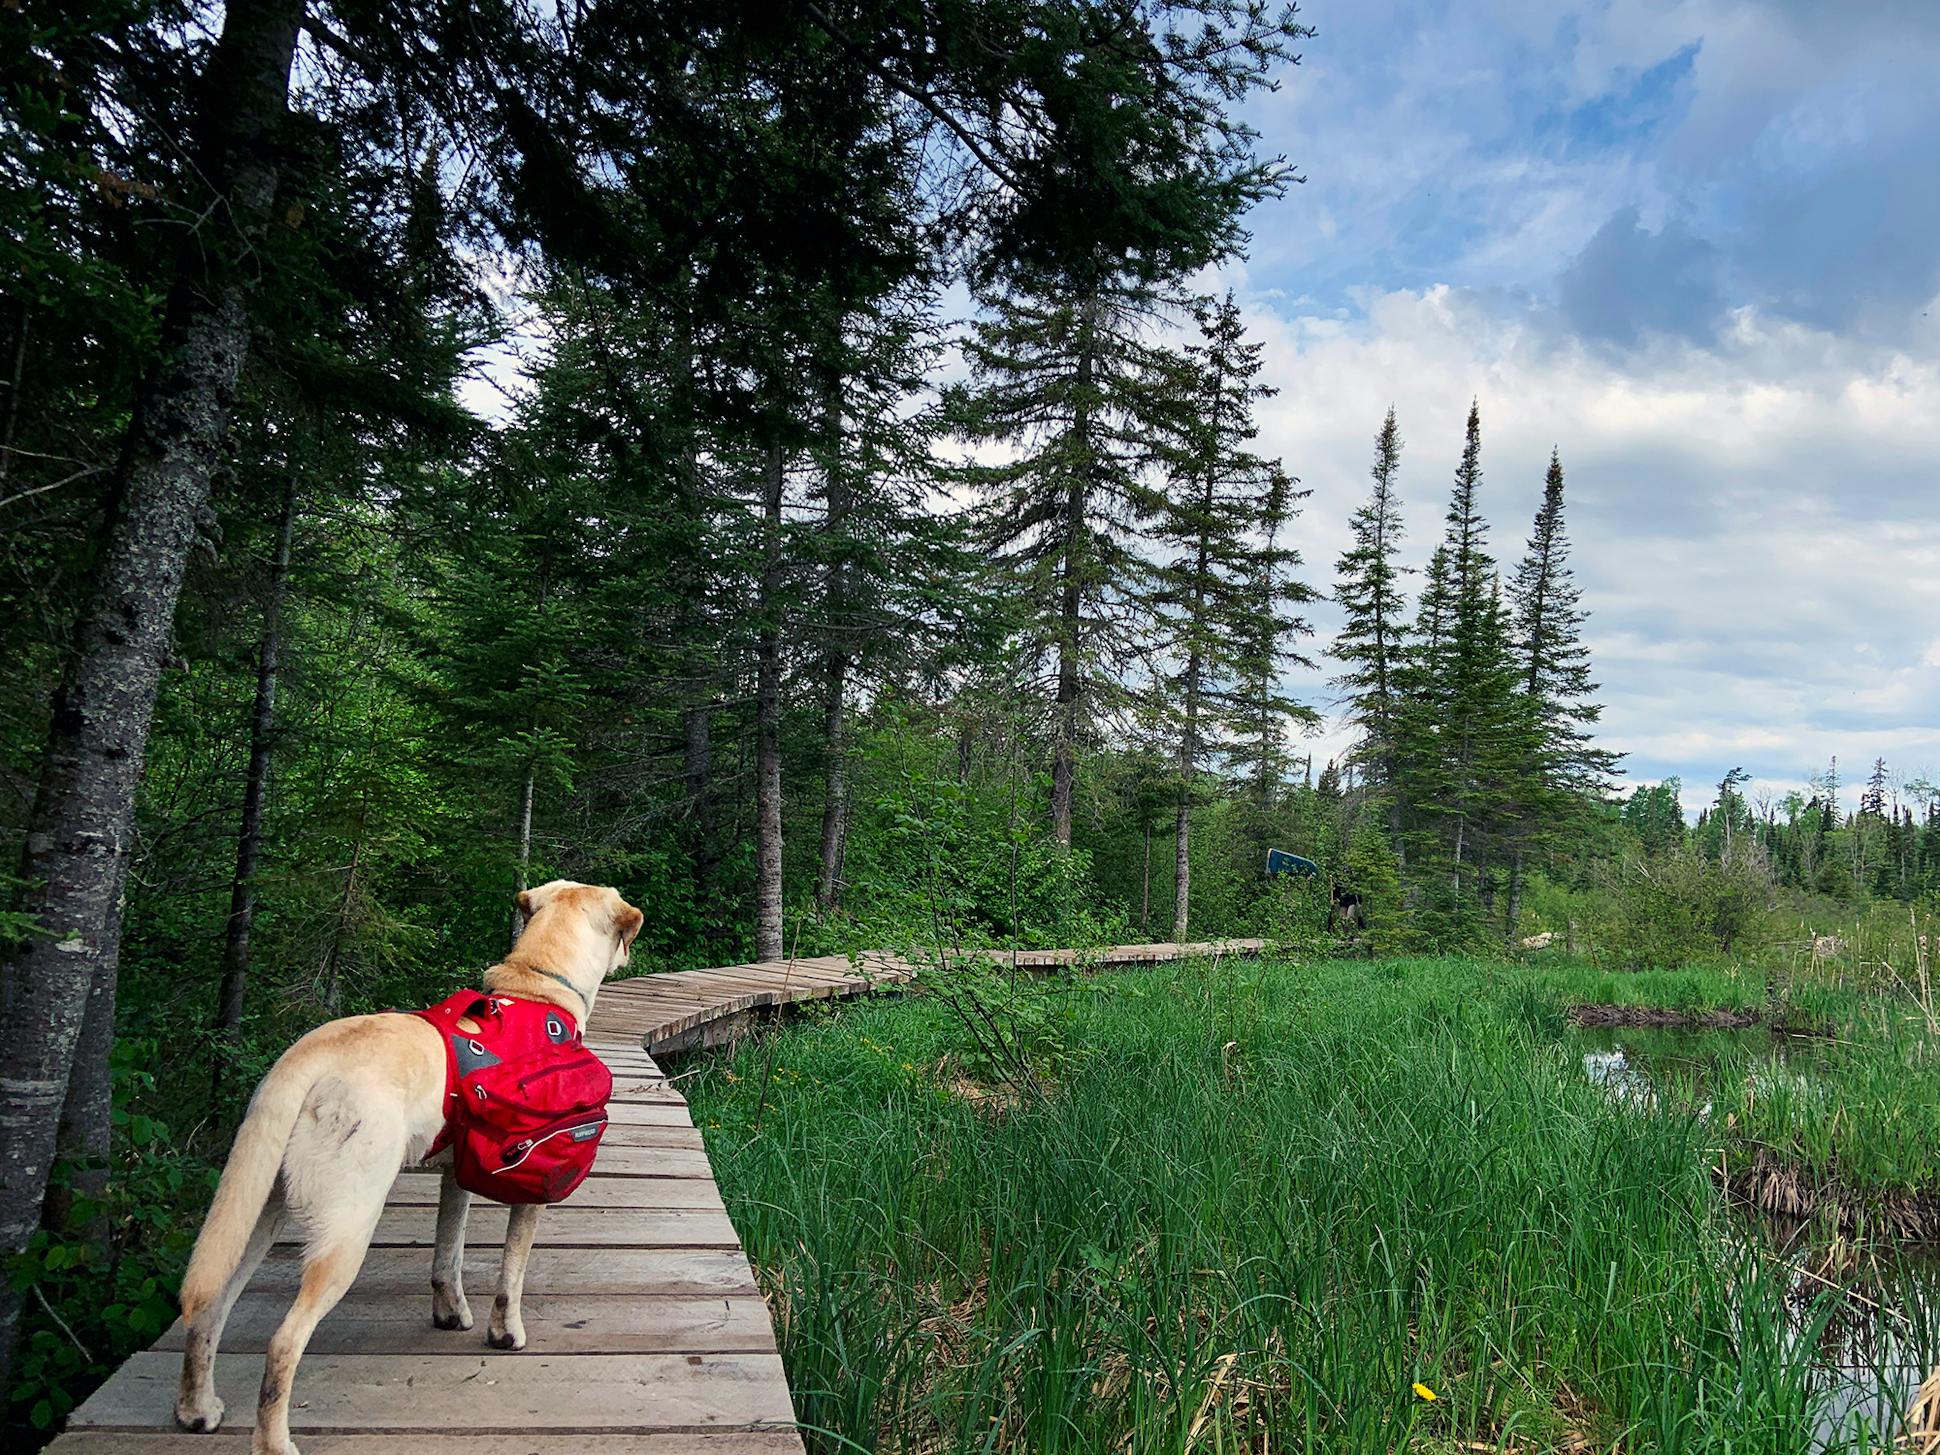 Crosby waited for Tony Jones and Nick Timmons along the Beaver Pond section of the Grand Portage.